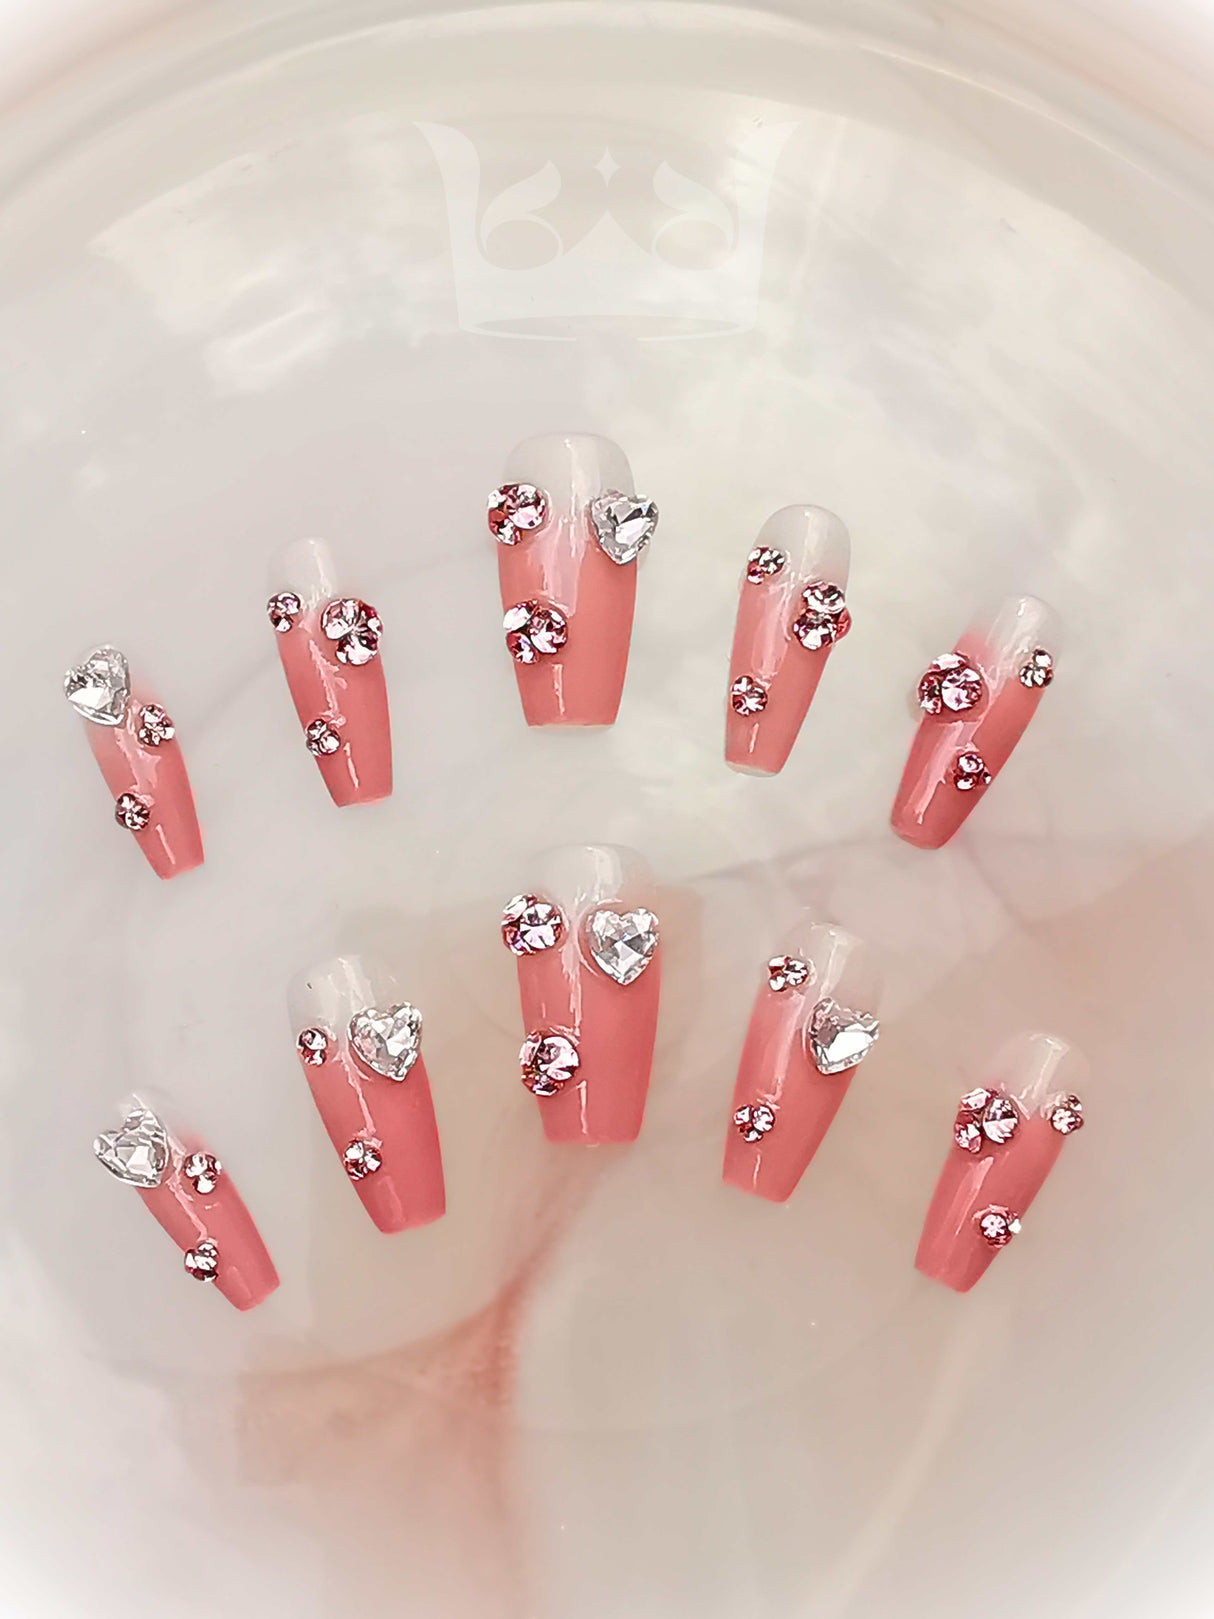 These press-on nails are designed for special occasions or as a statement accessory. They are pre-designed and vary in length, with a non-uniform arrangement of stones for a unique look.